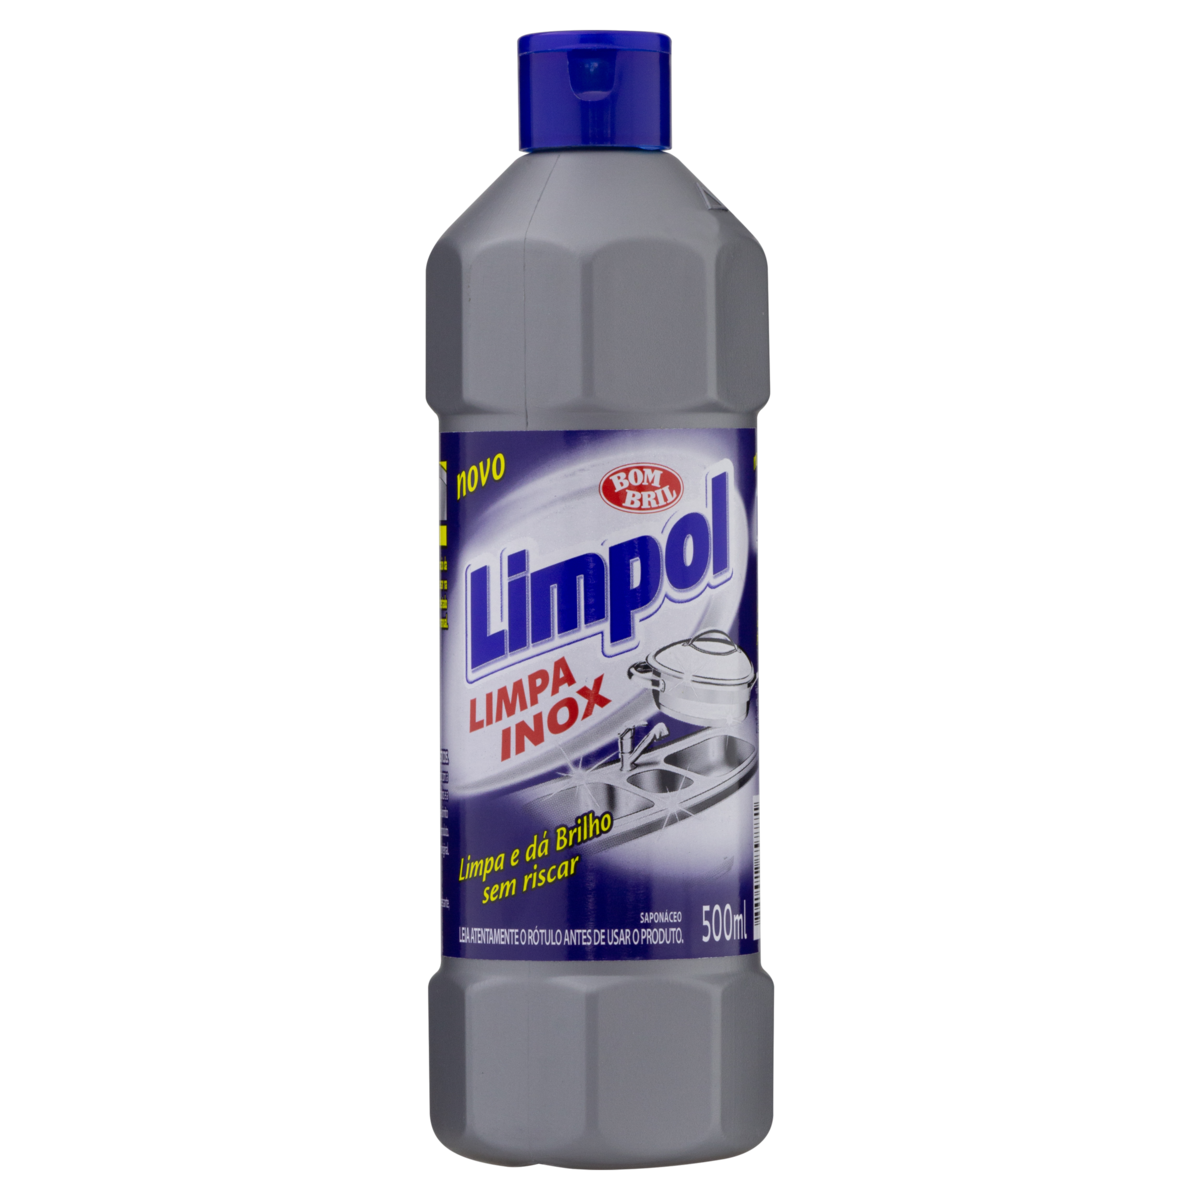 7891022857771 - SAPONÁCEO CREMOSO LIMPA INOX LIMPOL SQUEEZE 500ML